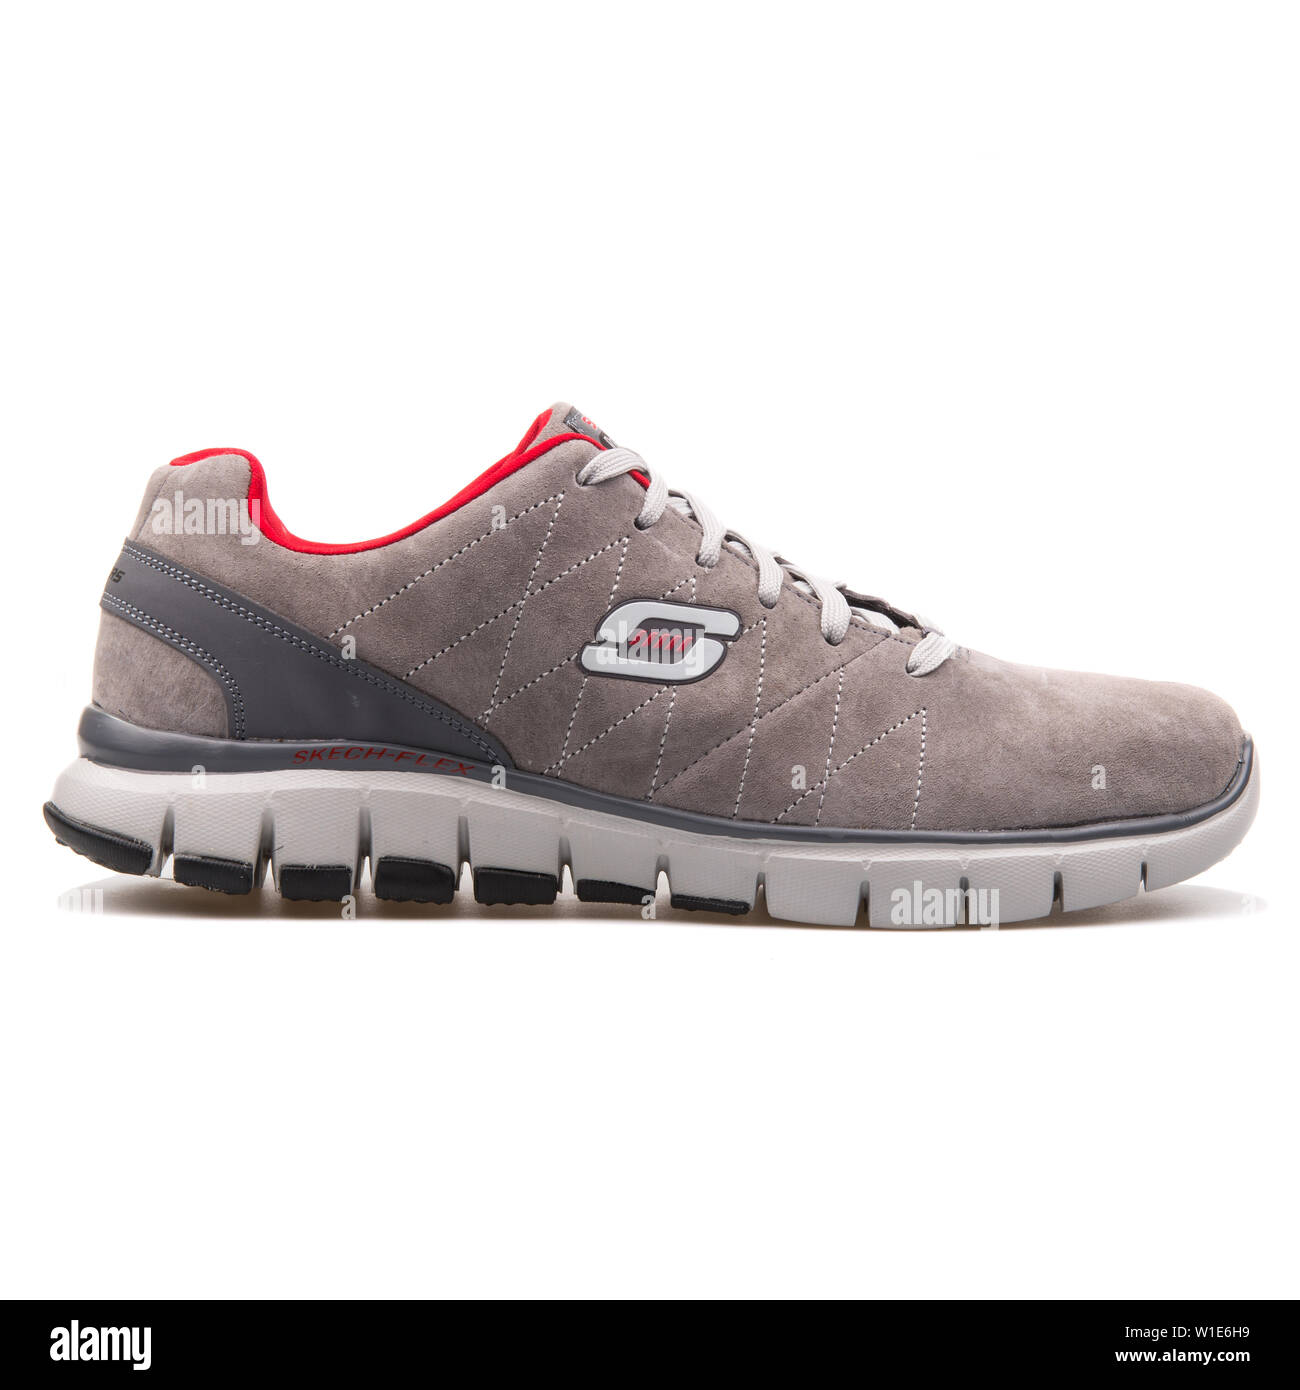 zapatillas skechers 2017 Cheaper Than Retail Price> Buy Clothing,  Accessories and lifestyle products for women & men -